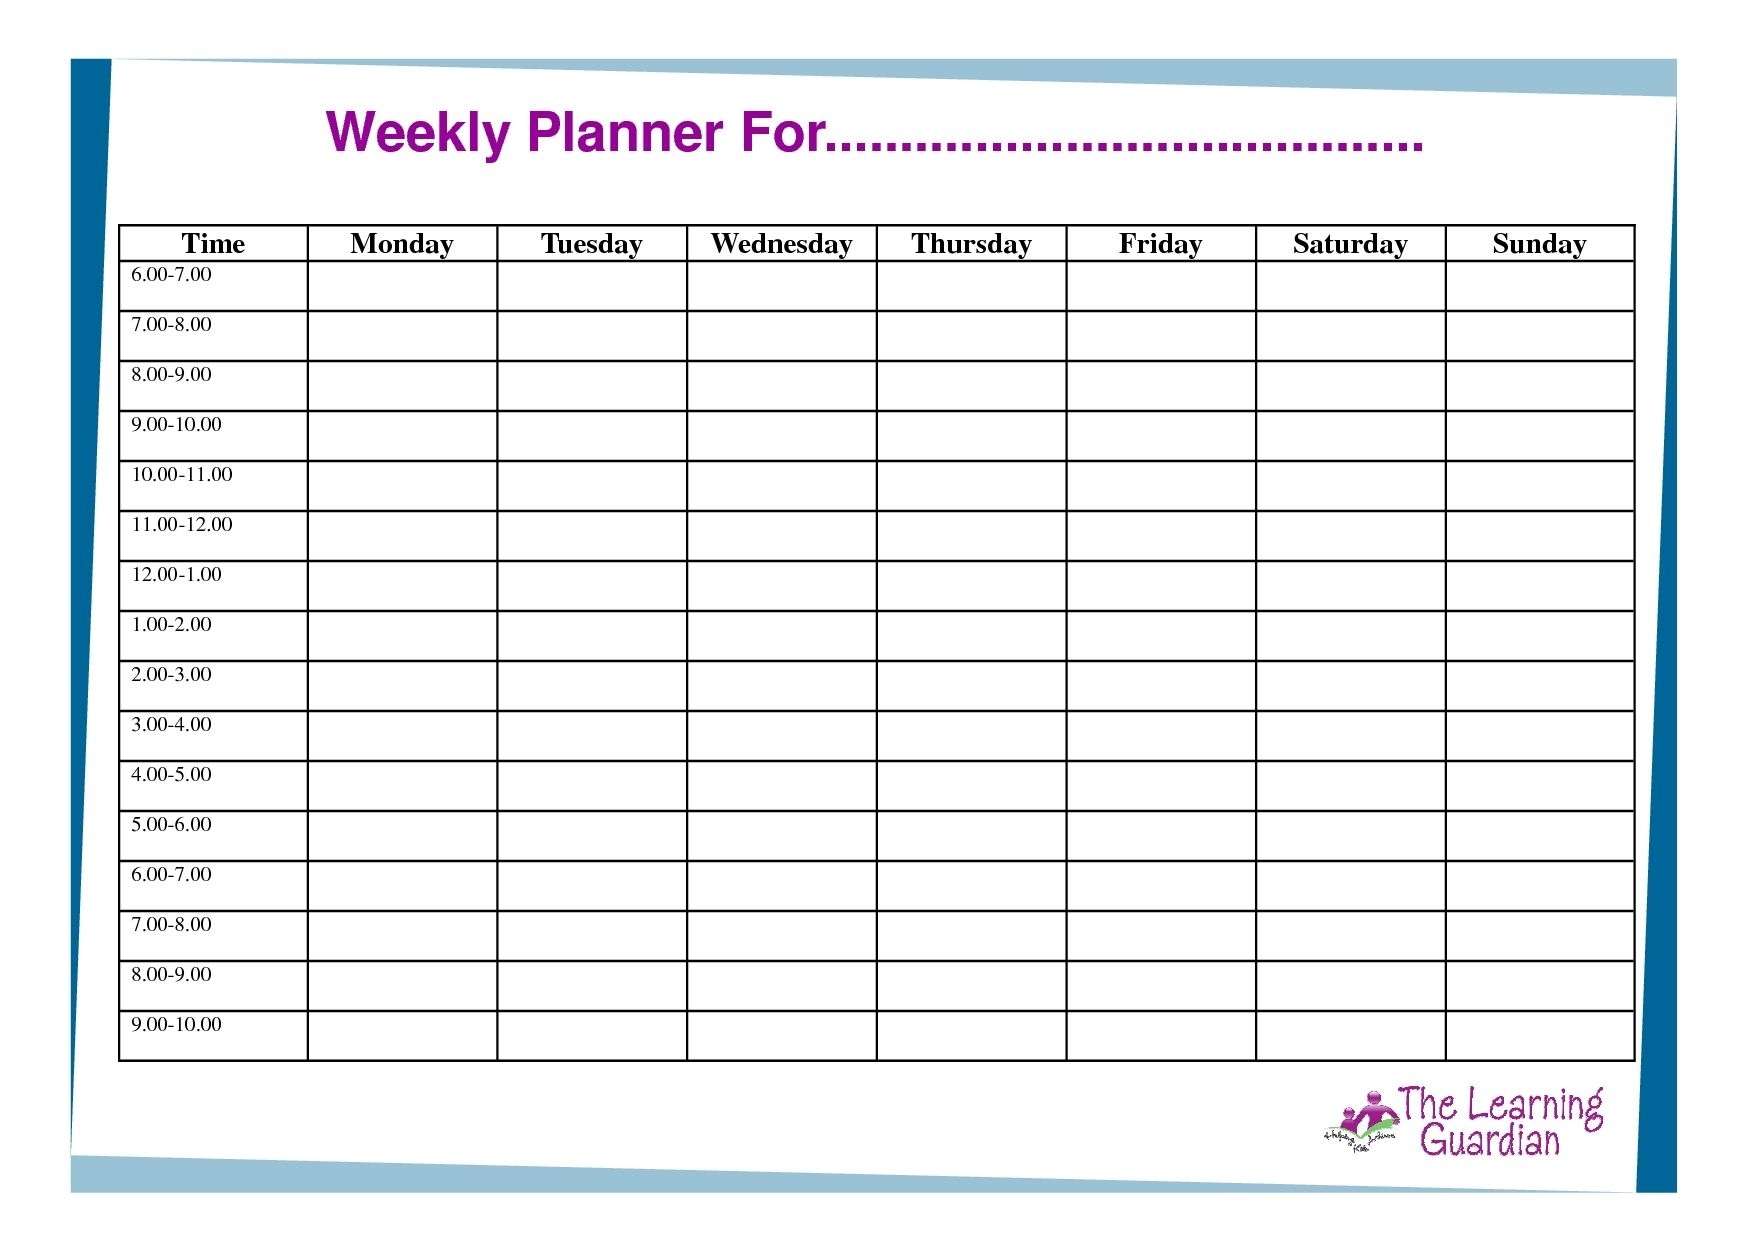 Free Printable Weekly Calendar Templates Weekly Planner For Time inside Printable Day To Day Calendar